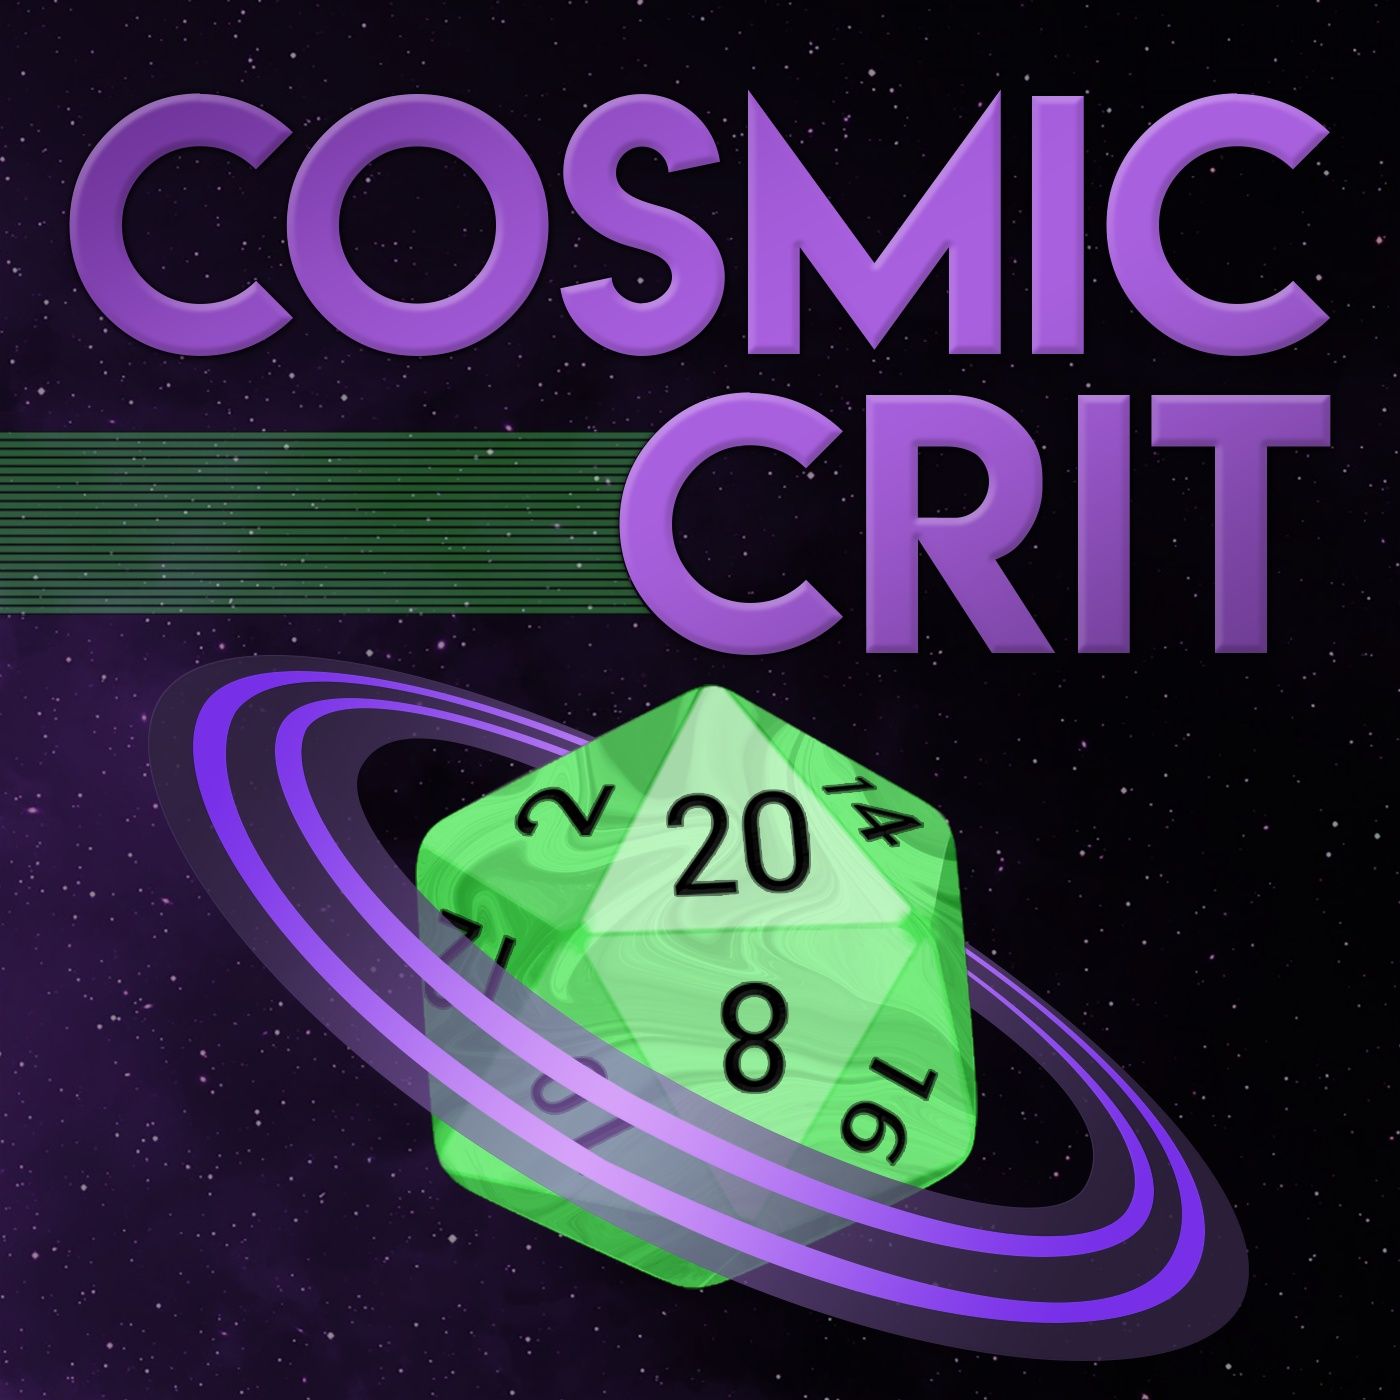 AoO: Interviews Patrick B. (GM Cosmic Crit/Author Book 1 